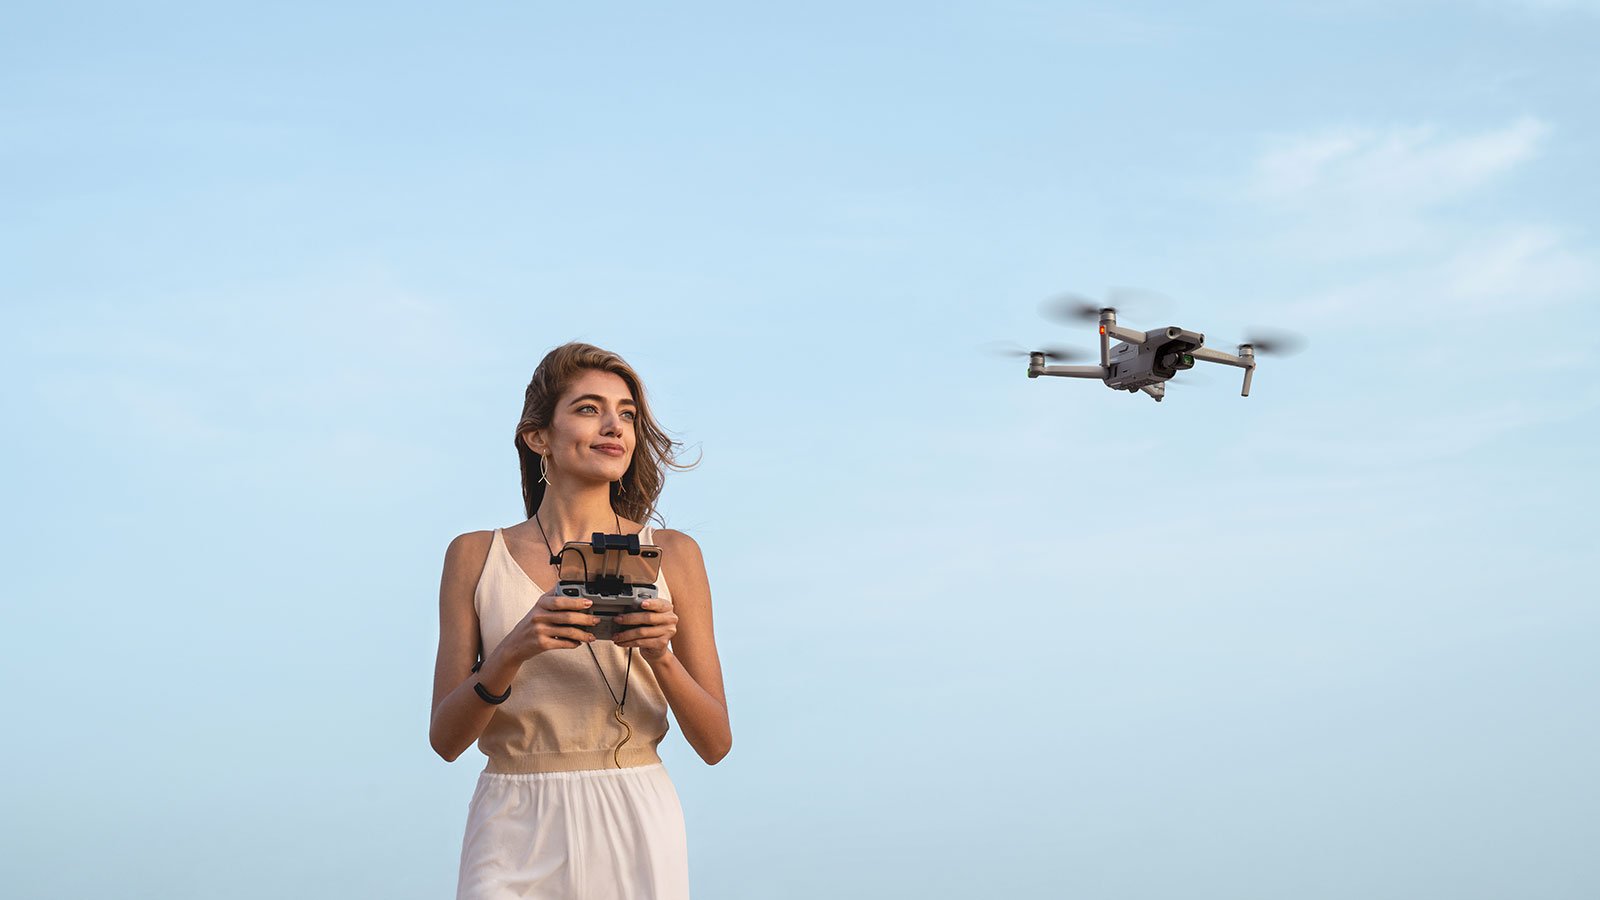 Learn to fly your drone legally